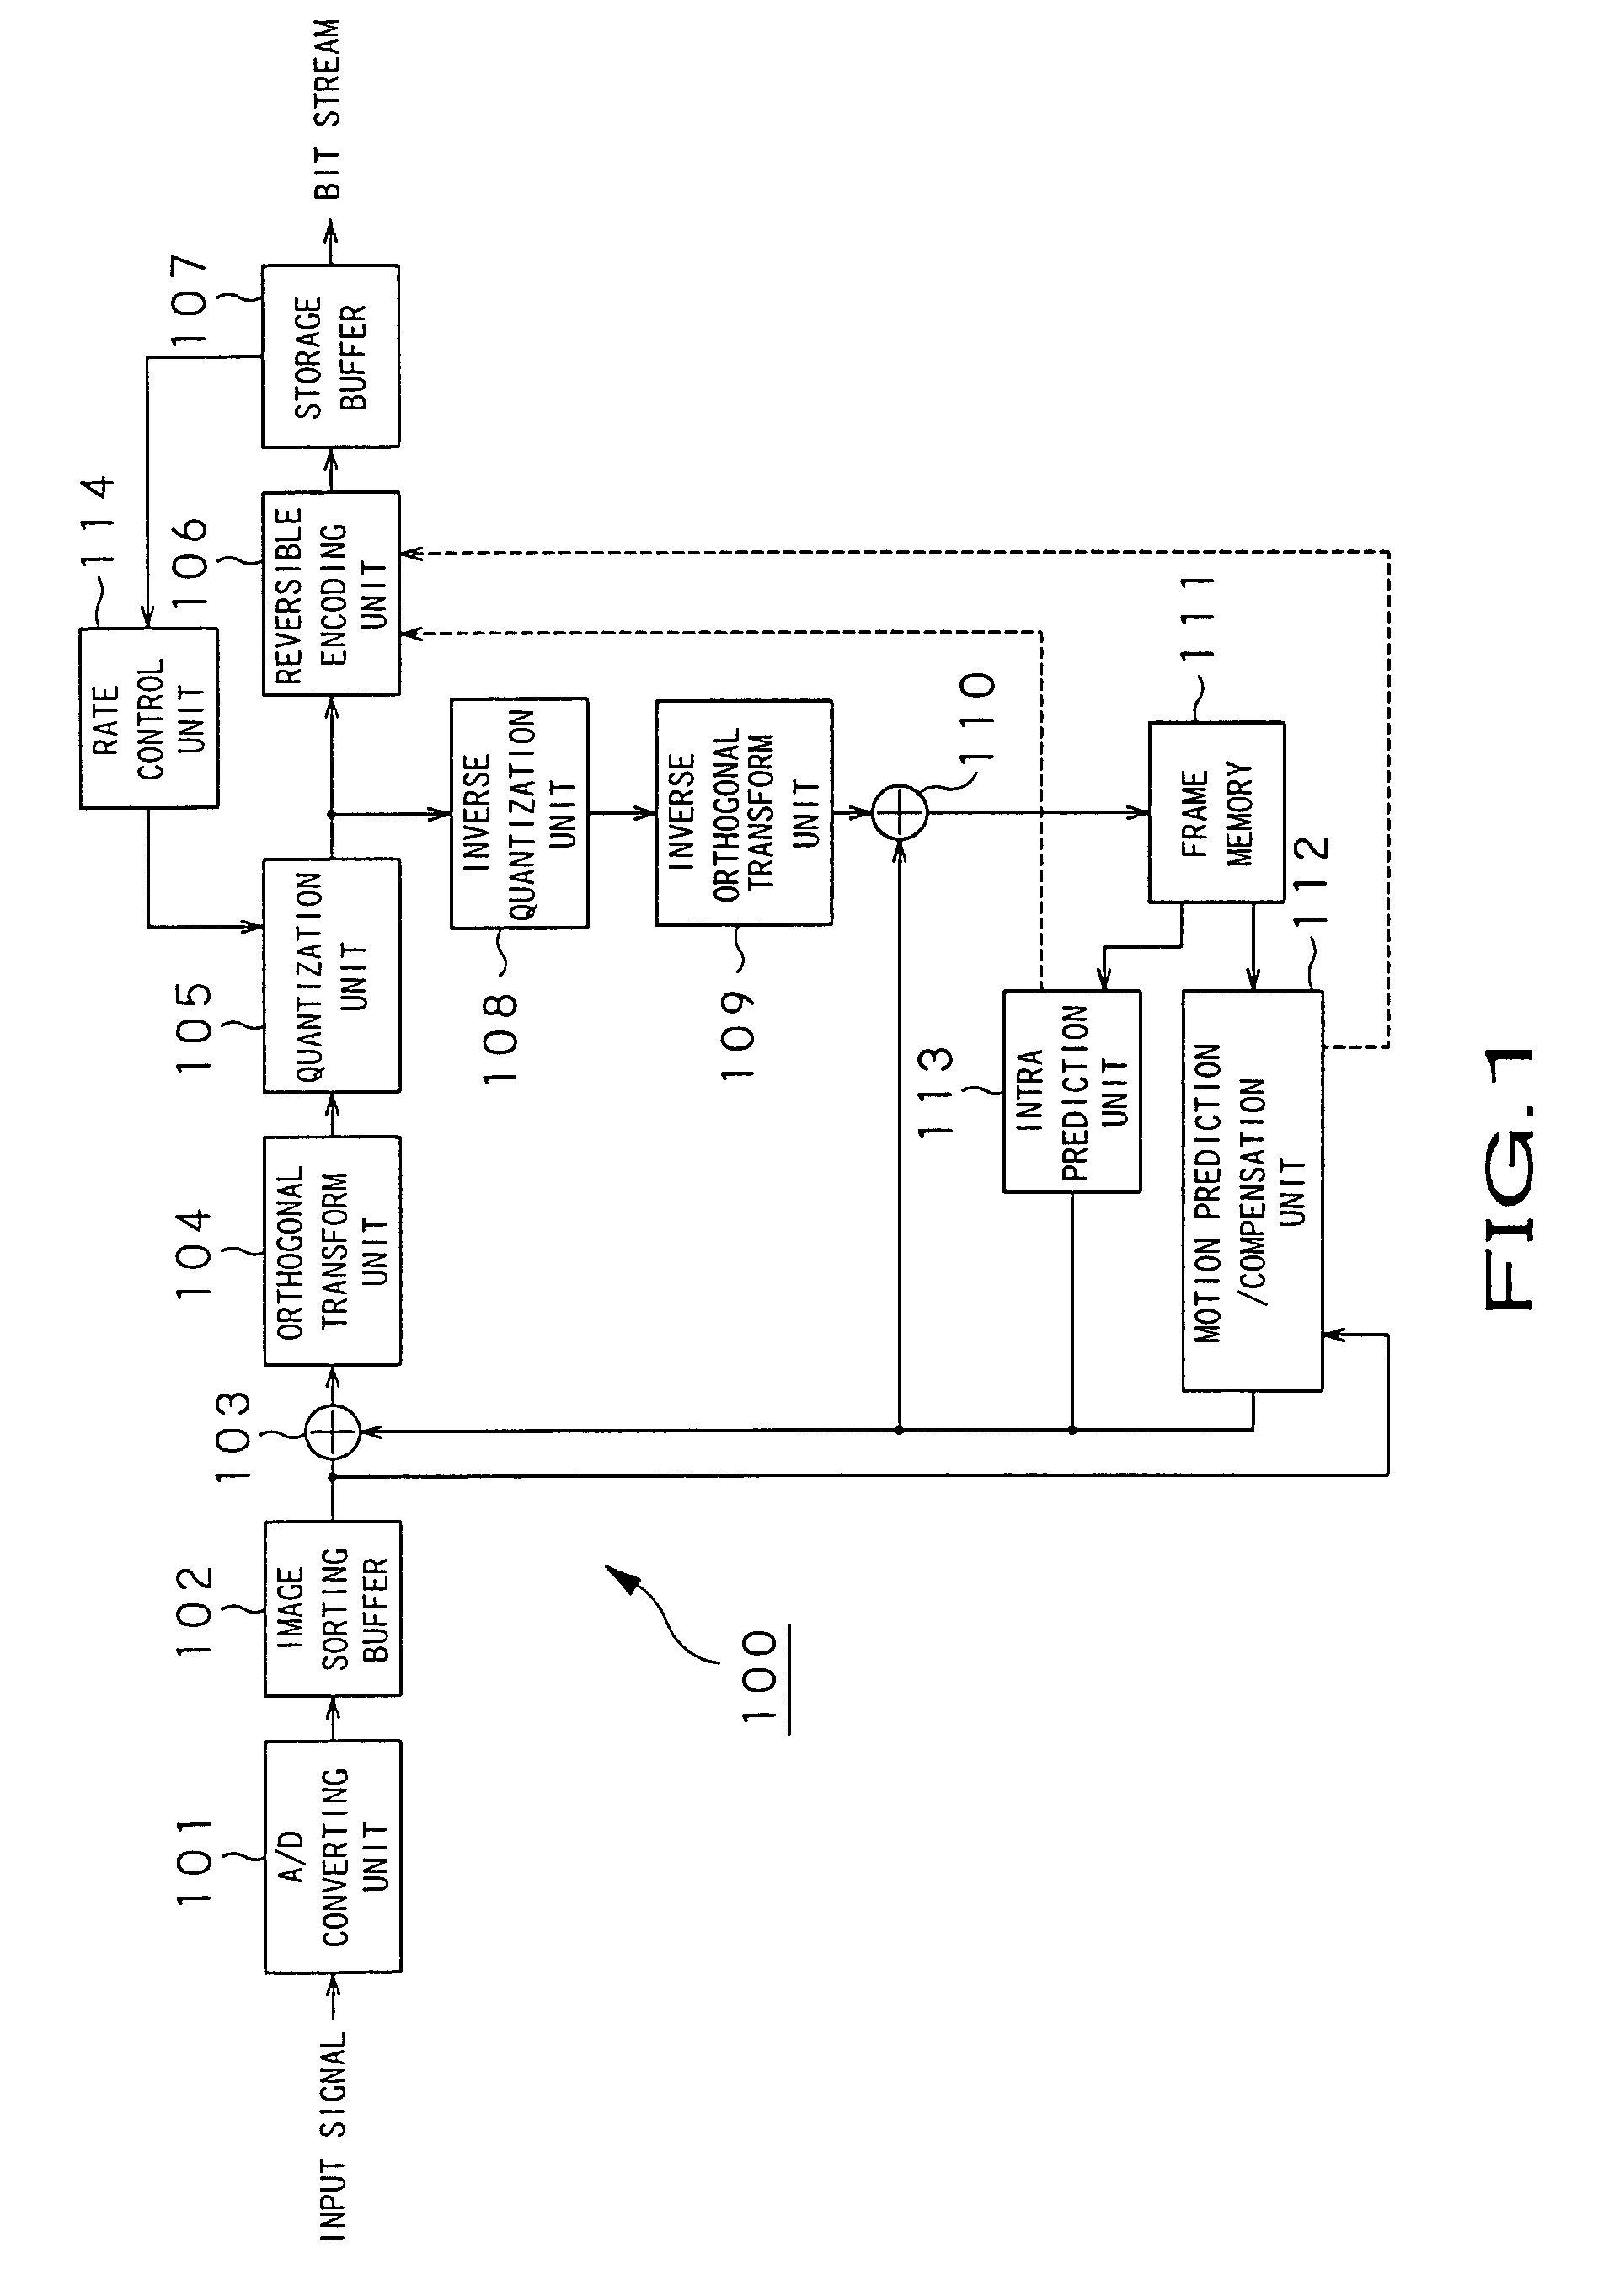 Image encoding apparatus and method for handling intra-image predictive encoding with various color spaces and color signal resolutions